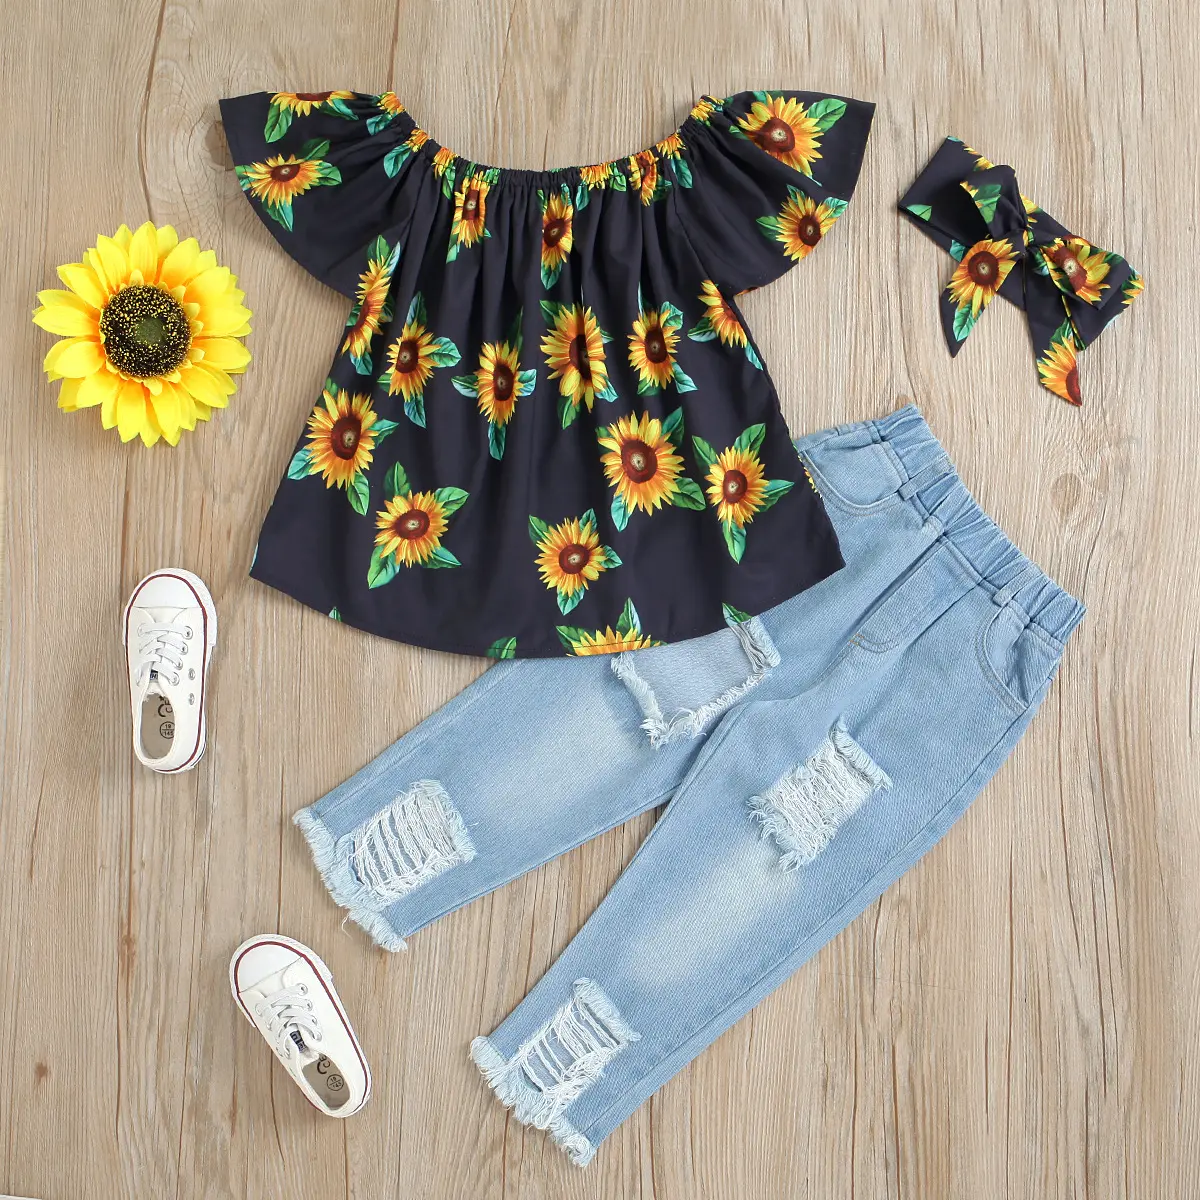 Girl Clothes 2pcs Sets Short Sleeve Sunflower Shirt With Jeans Pants Baby Children Kids Clothes